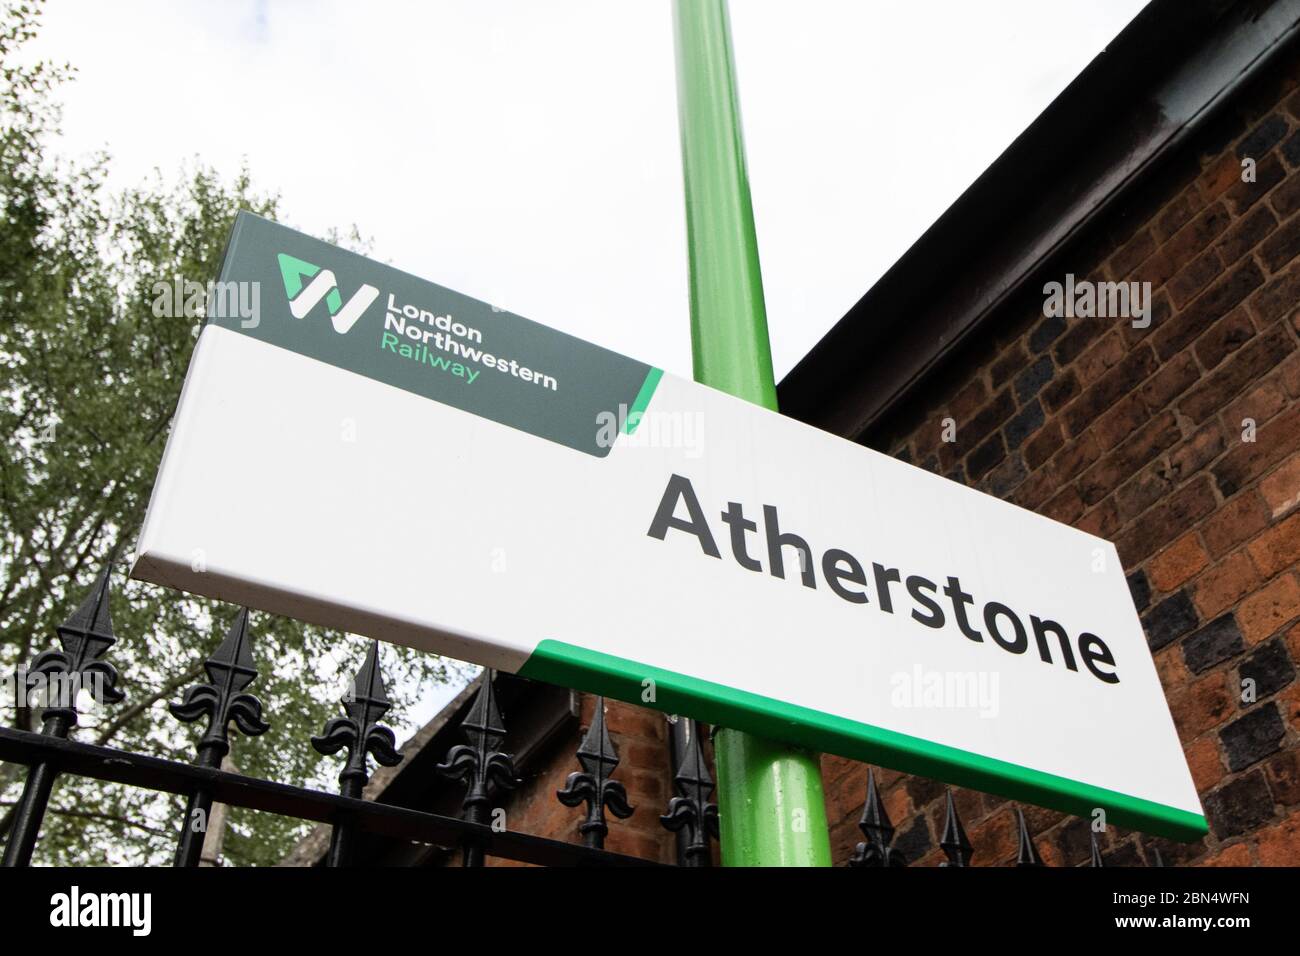 The London North Western train station, Atherstone, North Warwickshire. The station was once a main line station, it now has trains running to London, although high speed trains pass directly through the station. Stock Photo